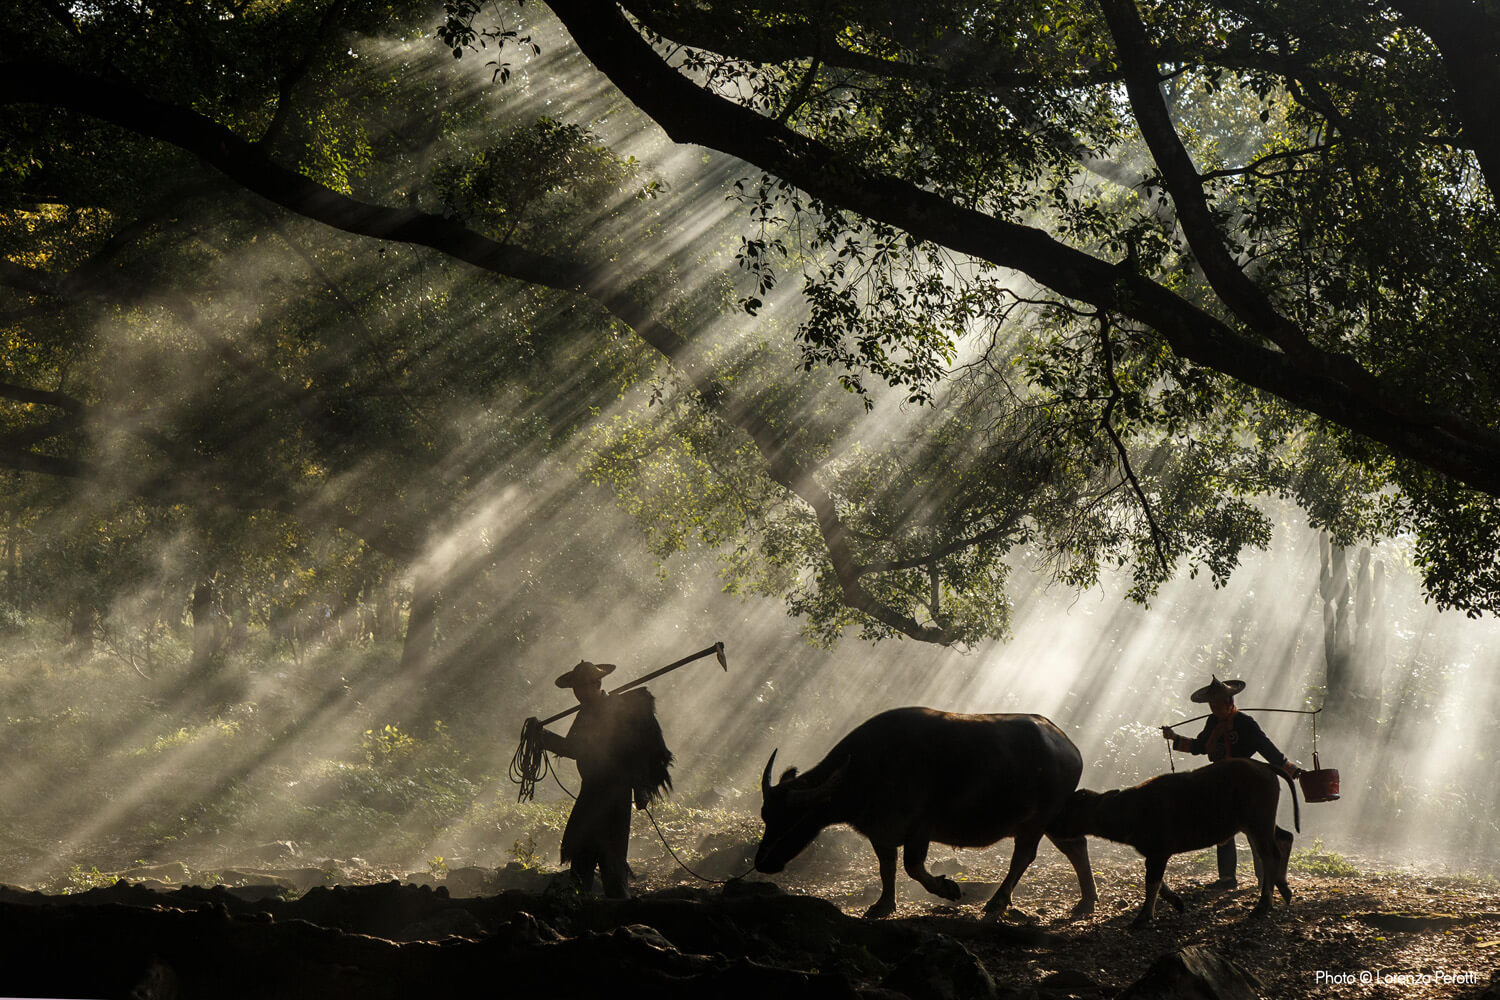 Shafts of sunlight stream through a canopy of large trees, illuminating the mist and two silhouetted figures, one leading an ox along a rustic path.